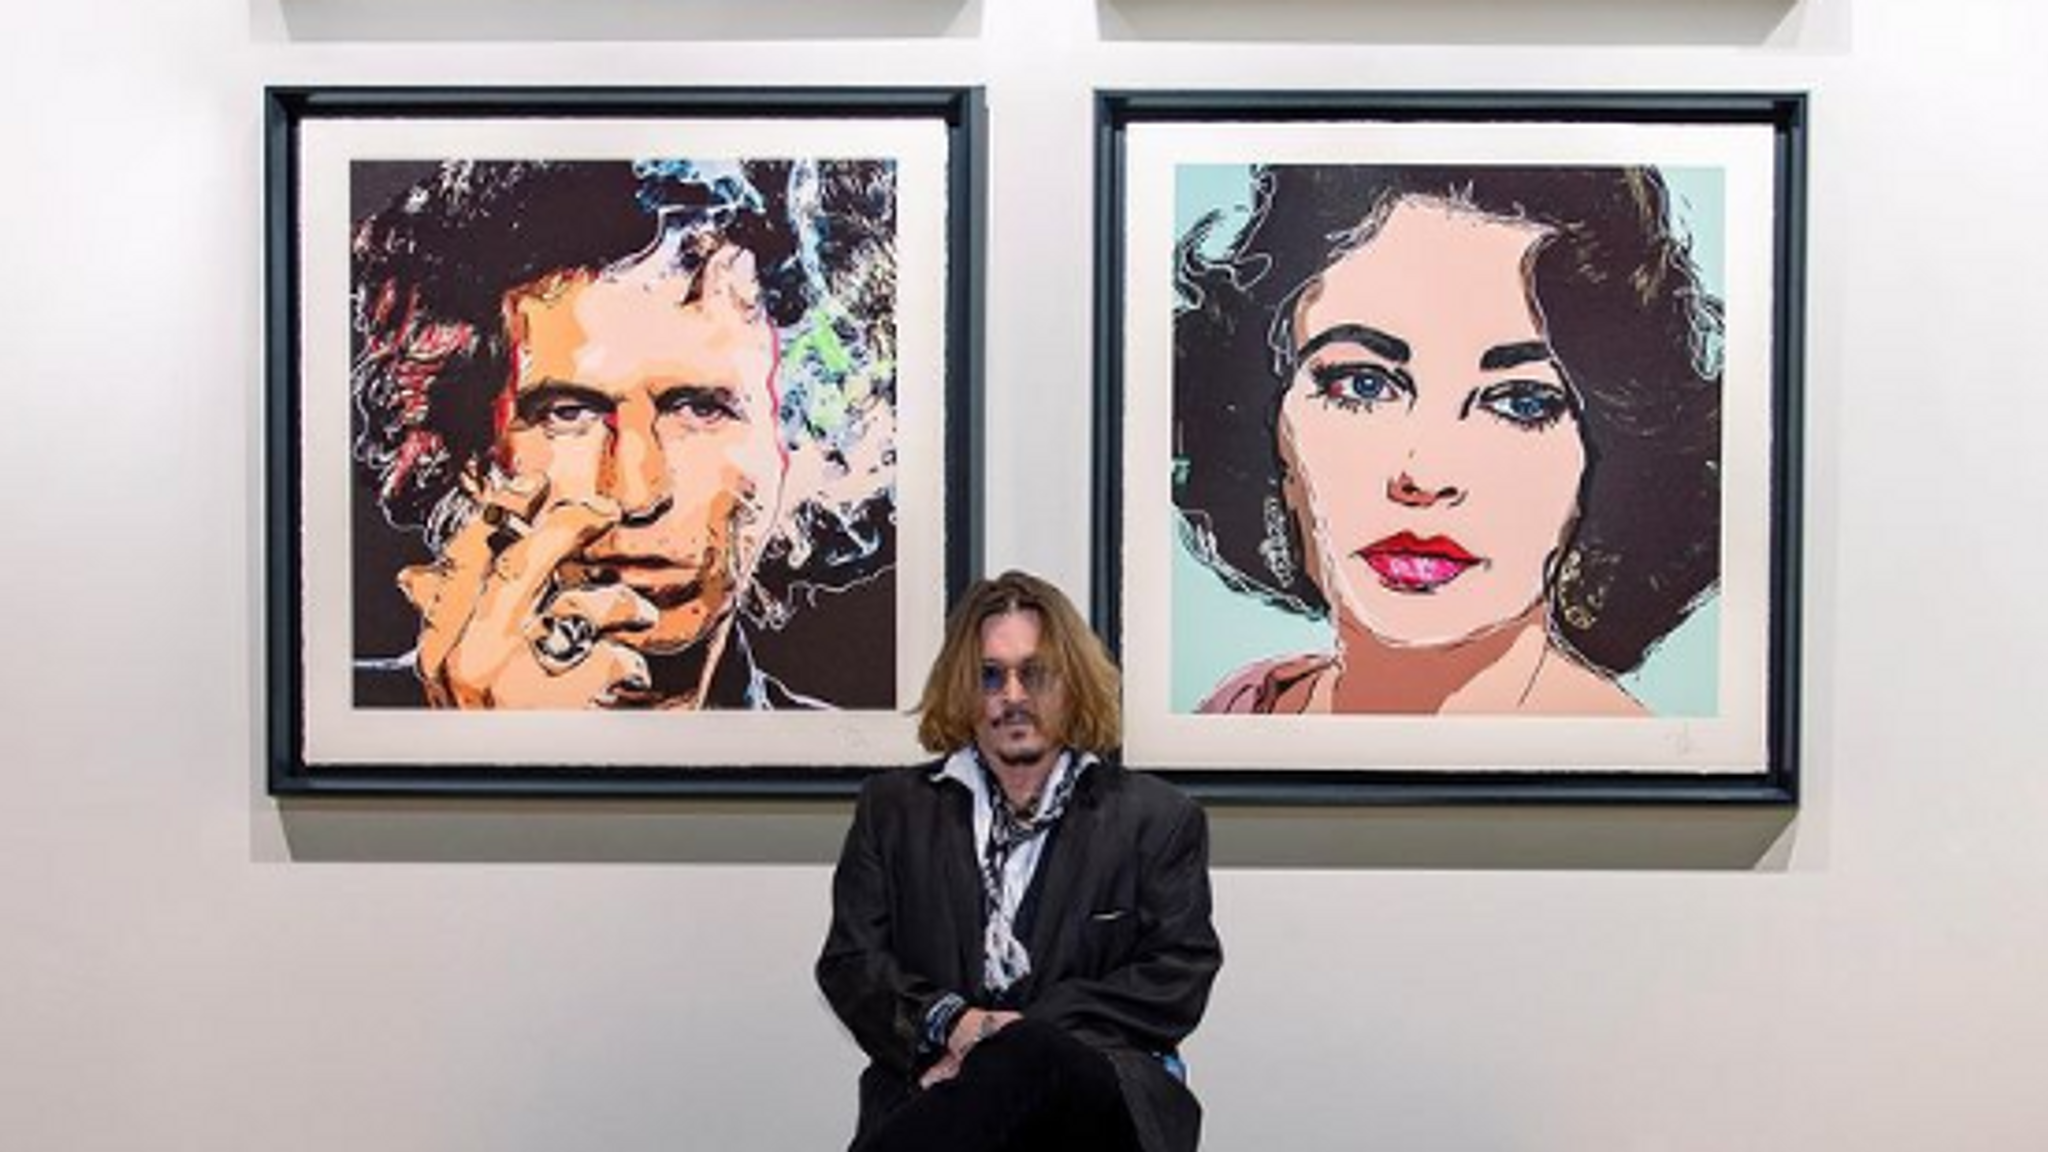 Johnny Depp in front of his two paintings